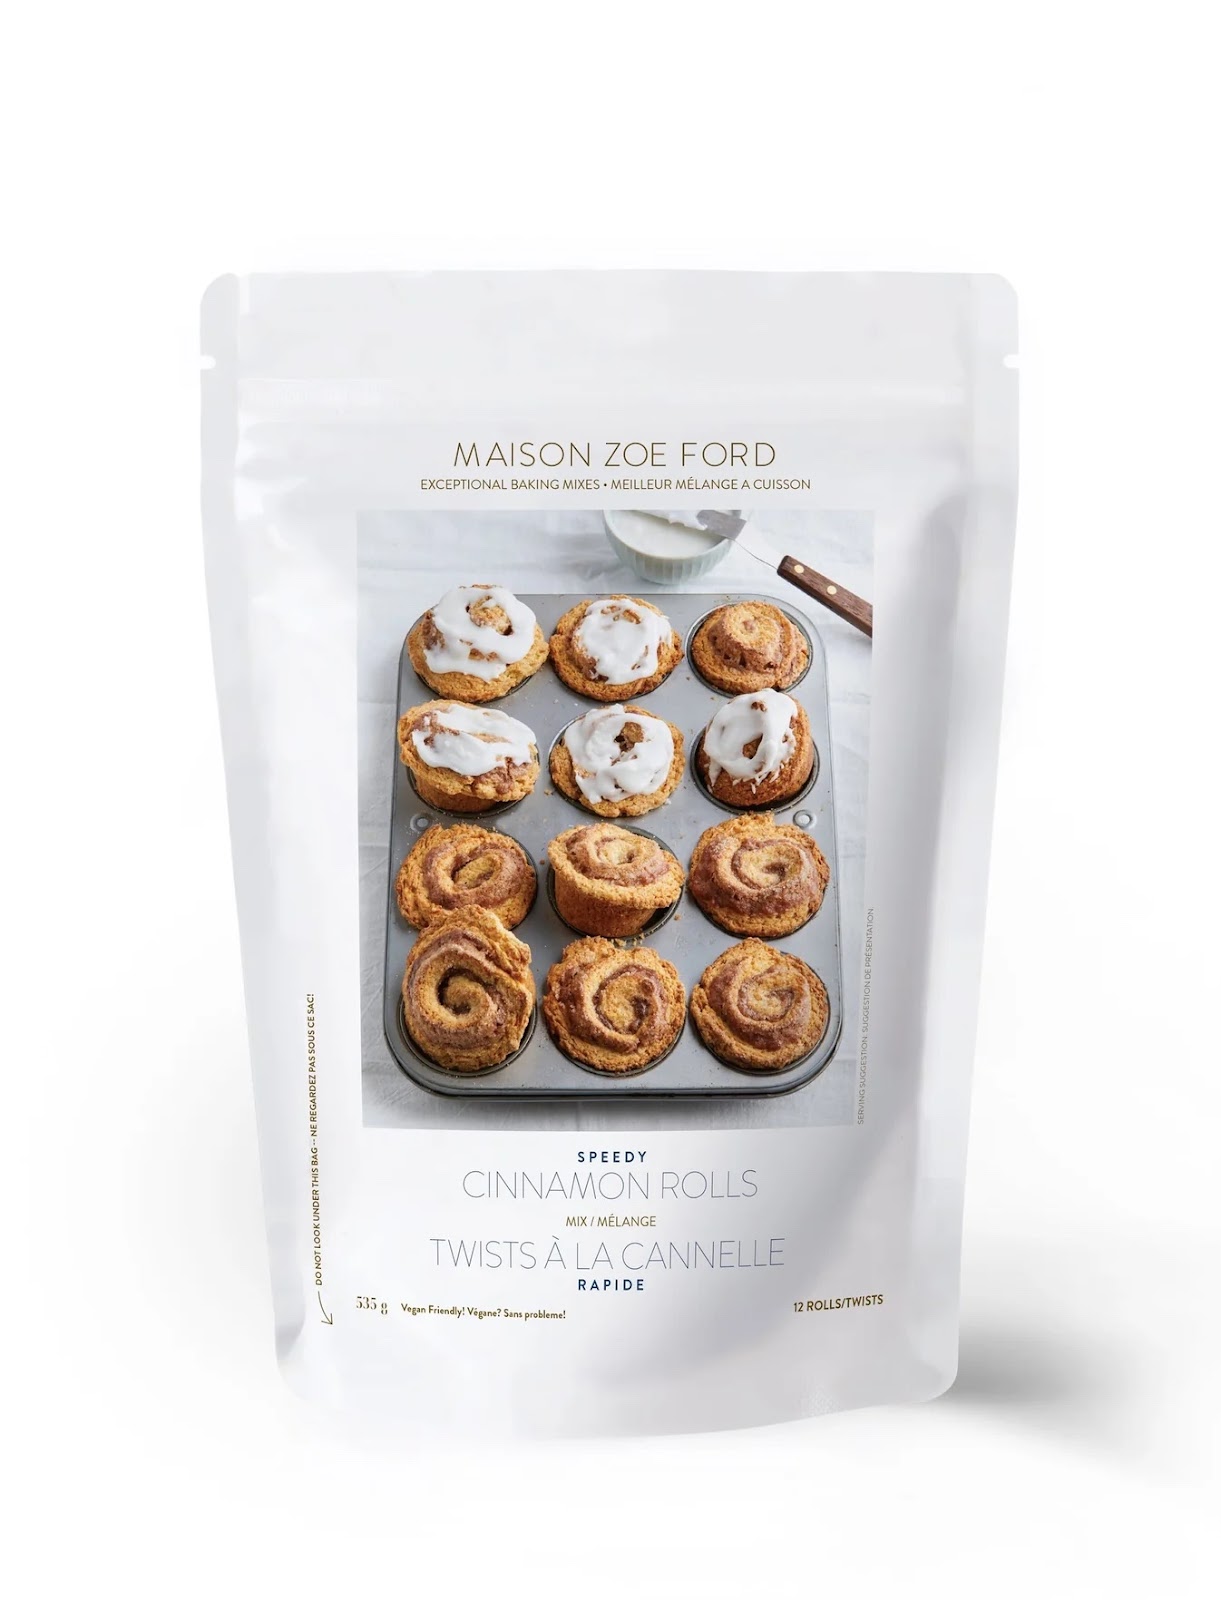 a bag of cinnamon roll mix with a picture of delicious-looking cinnamon rolls on it